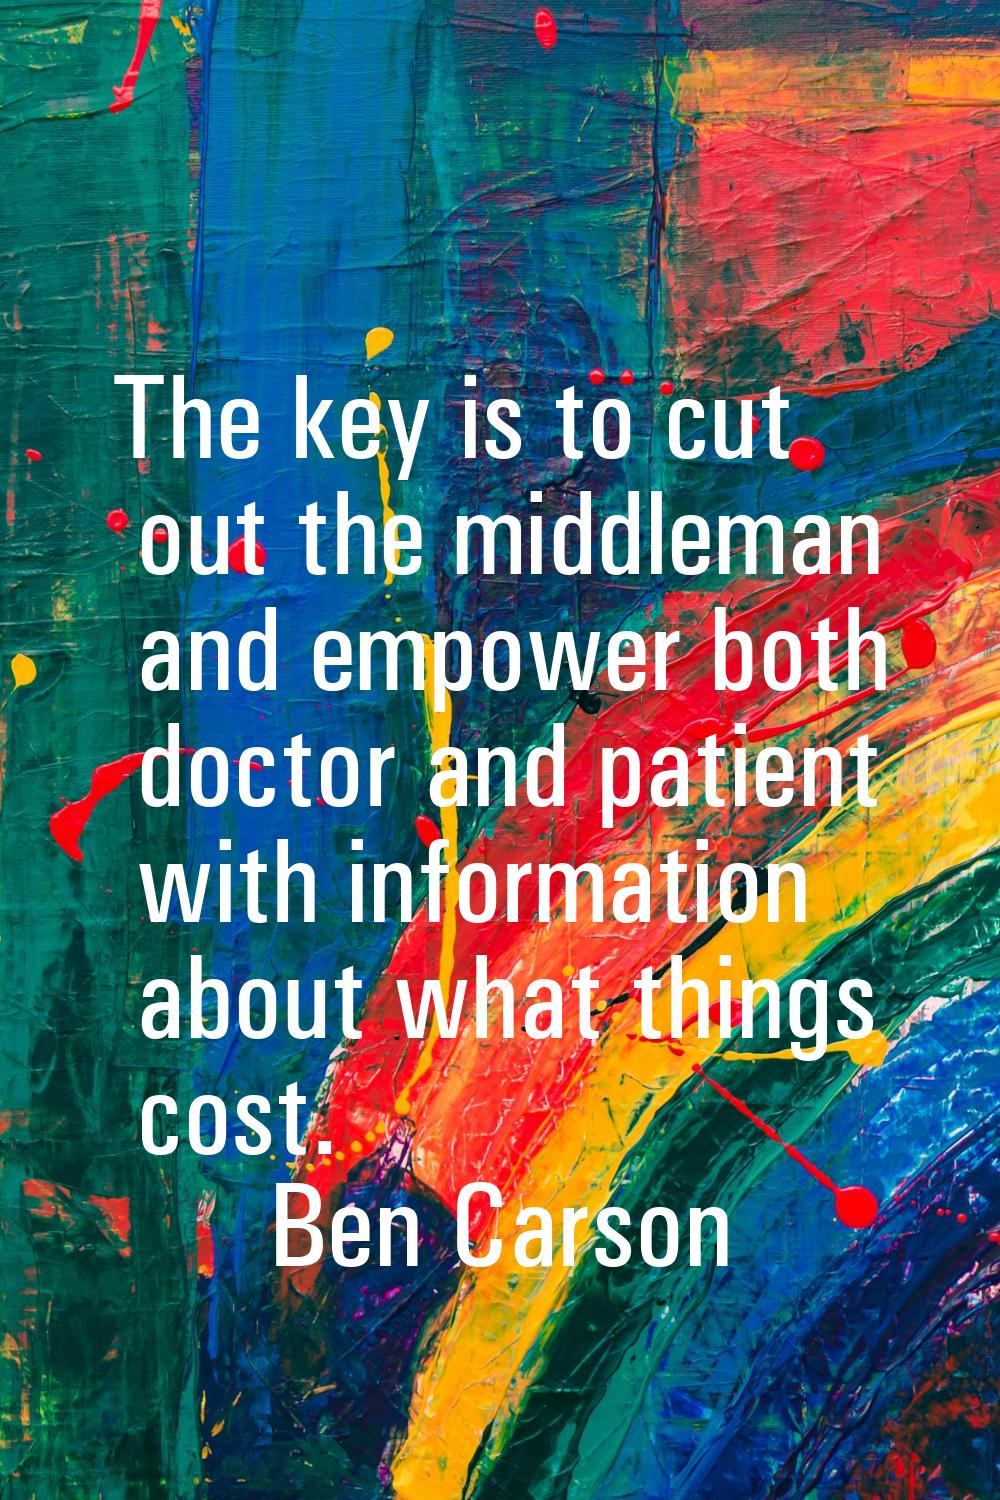 The key is to cut out the middleman and empower both doctor and patient with information about what